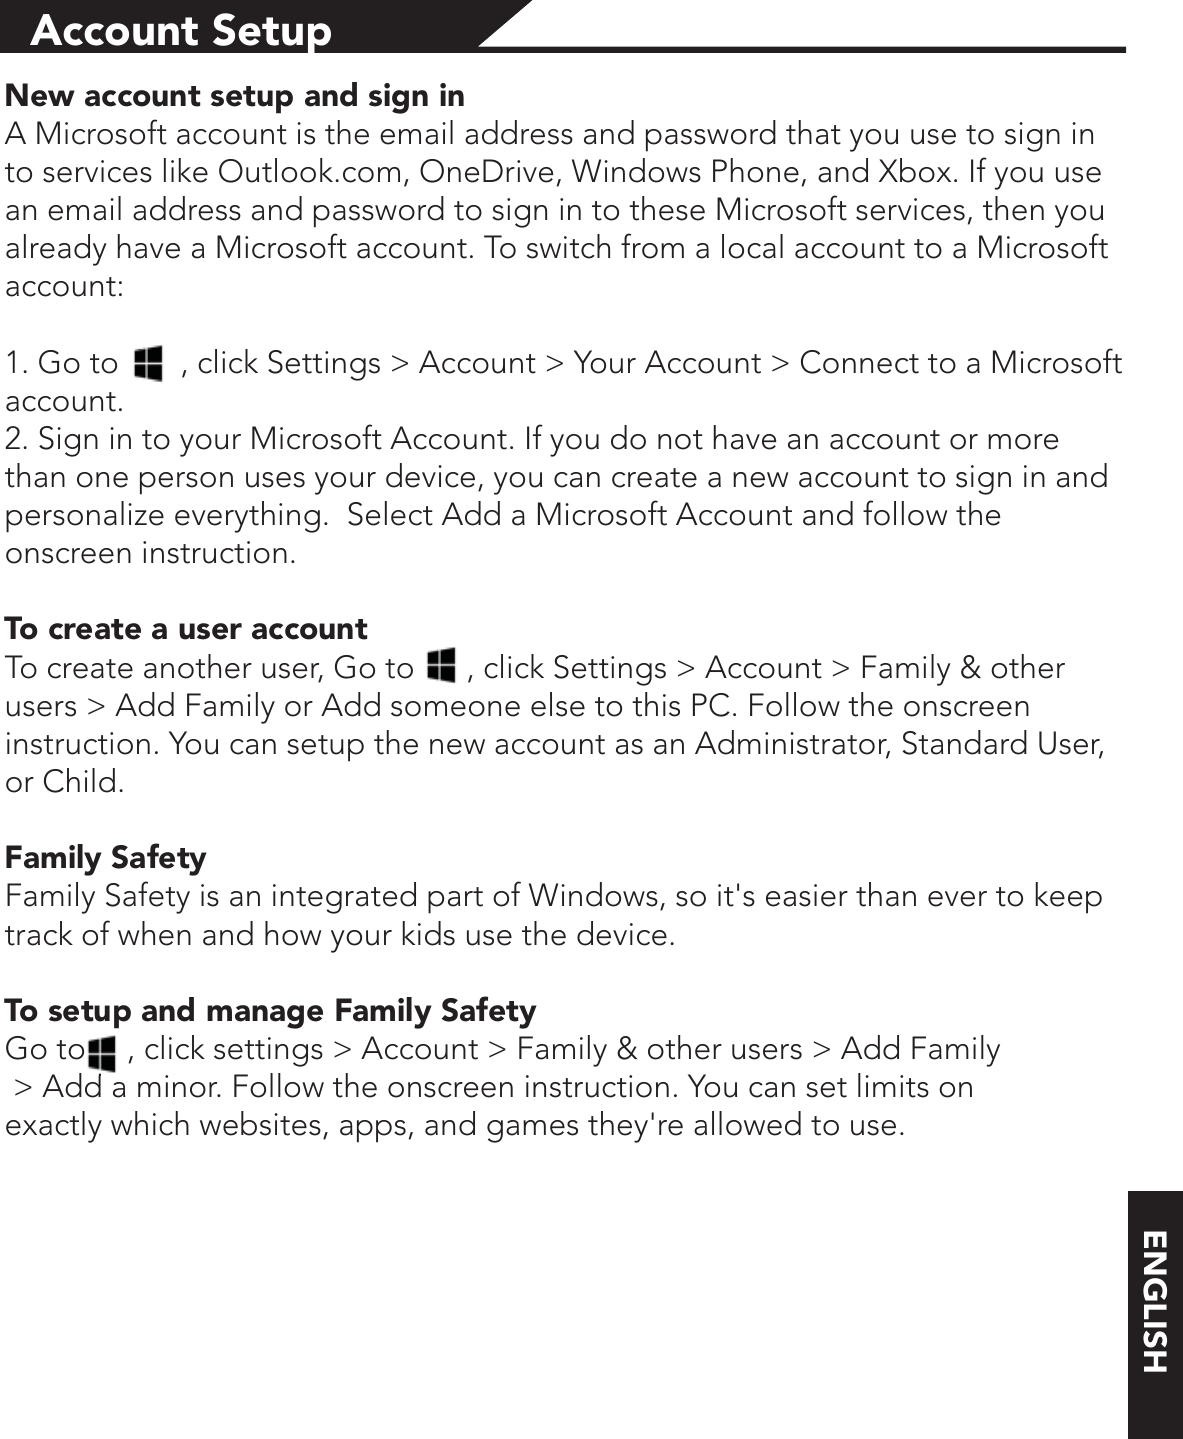 ENGLISHAccount SetupNew account setup and sign inA Microsoft account is the email address and password that you use to sign in to services like Outlook.com, OneDrive, Windows Phone, and Xbox. If you use an email address and password to sign in to these Microsoft services, then you already have a Microsoft account. To switch from a local account to a Microsoft account:1. Go to      , click Settings &gt; Account &gt; Your Account &gt; Connect to a Microsoft account.2. Sign in to your Microsoft Account. If you do not have an account or more than one person uses your device, you can create a new account to sign in and personalize everything.  Select Add a Microsoft Account and follow the onscreen instruction.To create a user accountTo create another user, Go to      , click Settings &gt; Account &gt; Family &amp; other users &gt; Add Family or Add someone else to this PC. Follow the onscreen instruction. You can setup the new account as an Administrator, Standard User, or Child.(COKN[5CHGV[Family Safety is an integrated part of Windows, so it&apos;s easier than ever to keep track of when and how your kids use the device.6QUGVWRCPFOCPCIG(COKN[5CHGV[Go to     , click settings &gt; Account &gt; Family &amp; other users &gt; Add Family &gt; Add a minor. Follow the onscreen instruction. You can set limits on exactly which websites, apps, and games they&apos;re allowed to use.